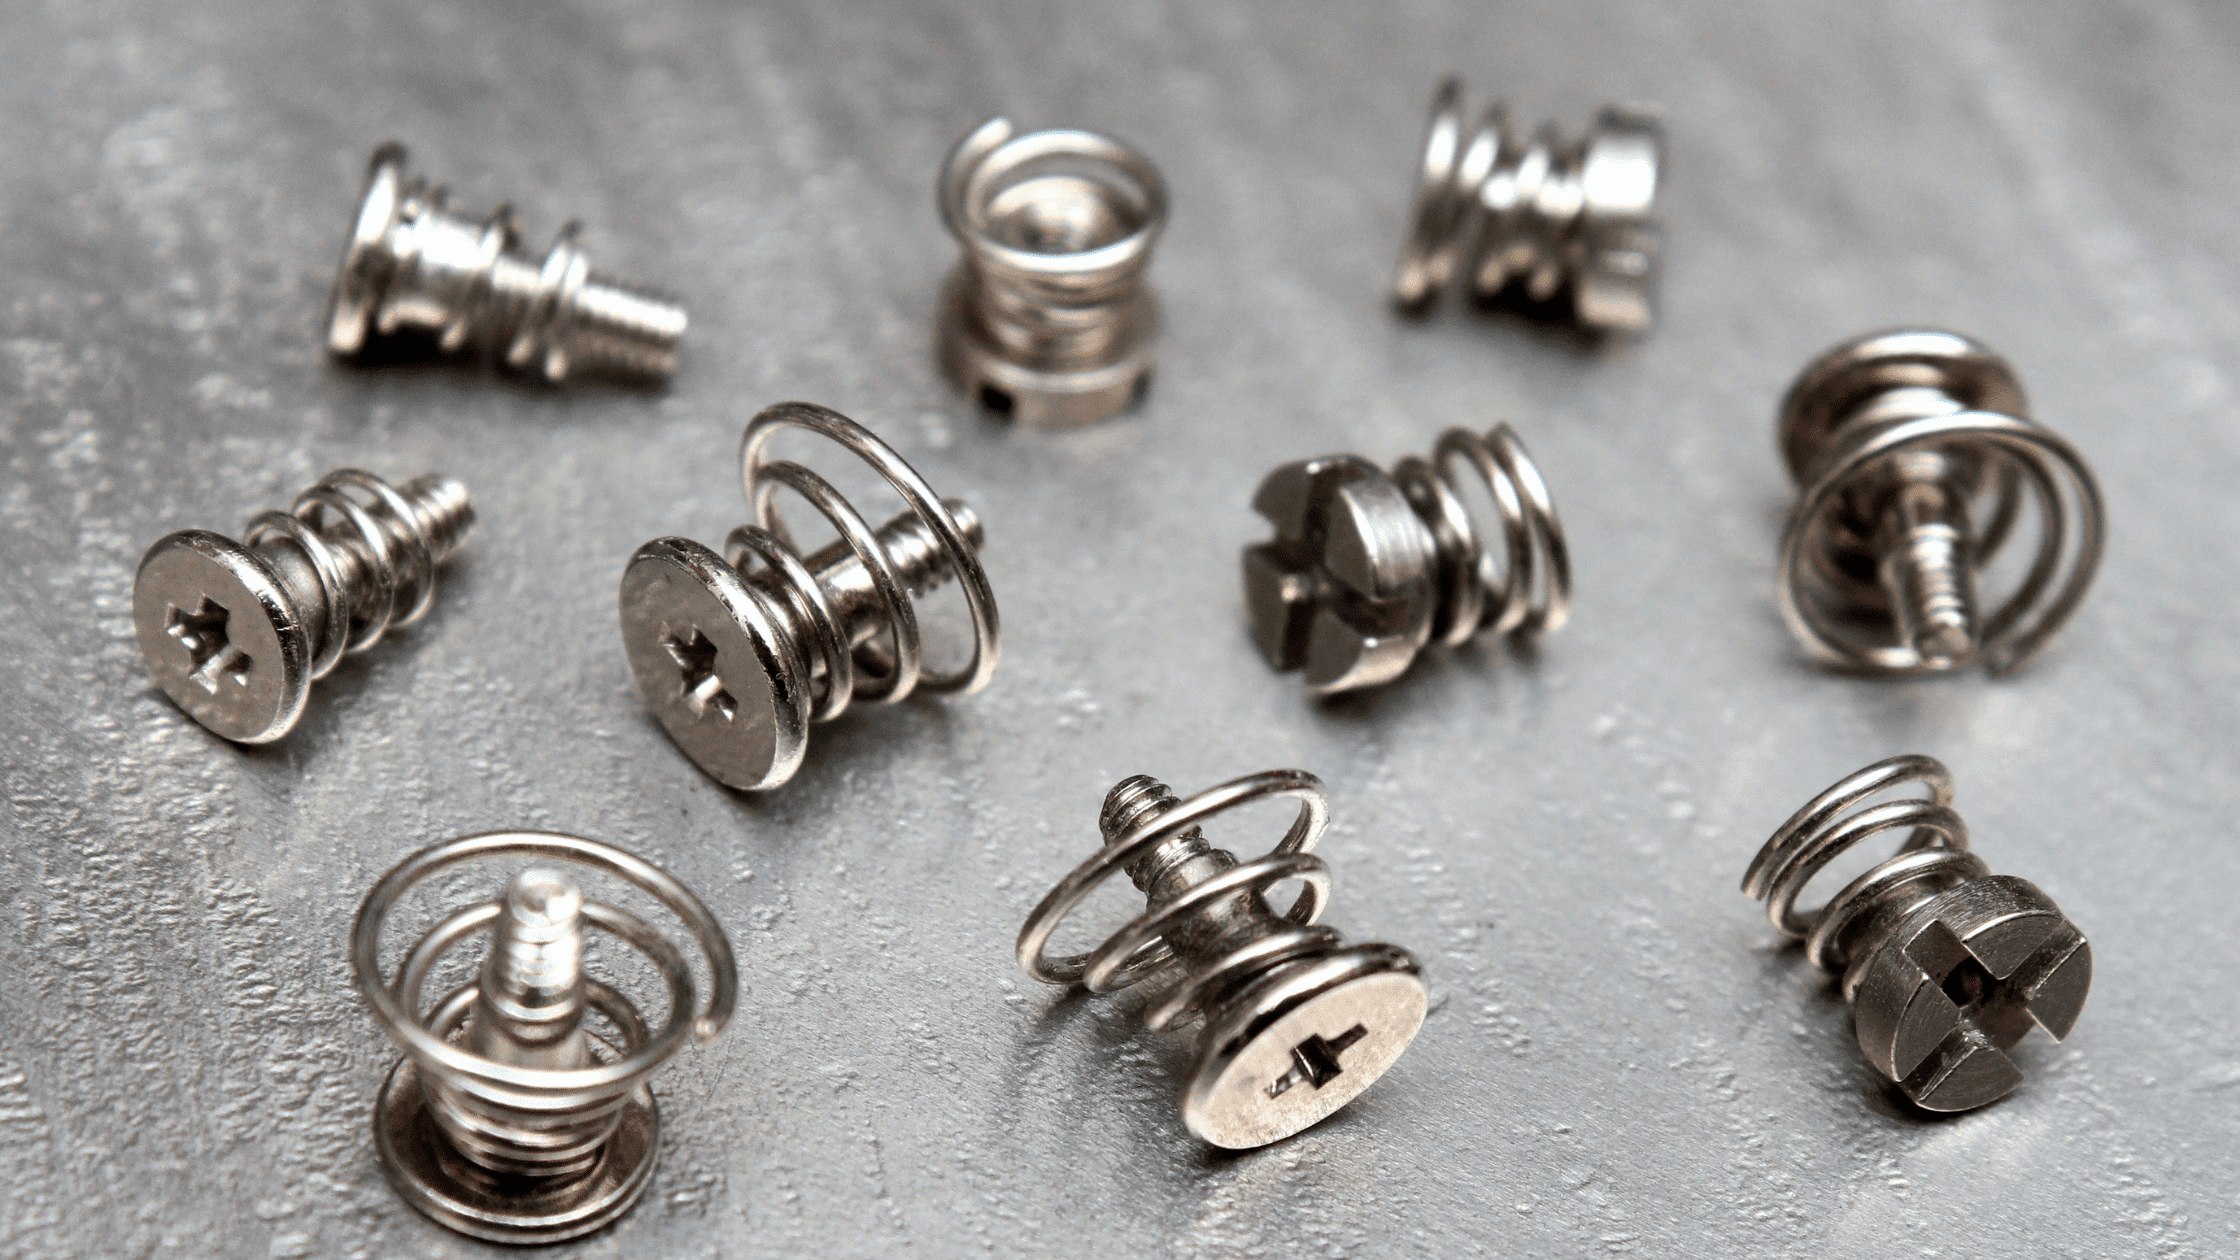 Spring Loaded Screw For Soundproofing: Why It Is Better?